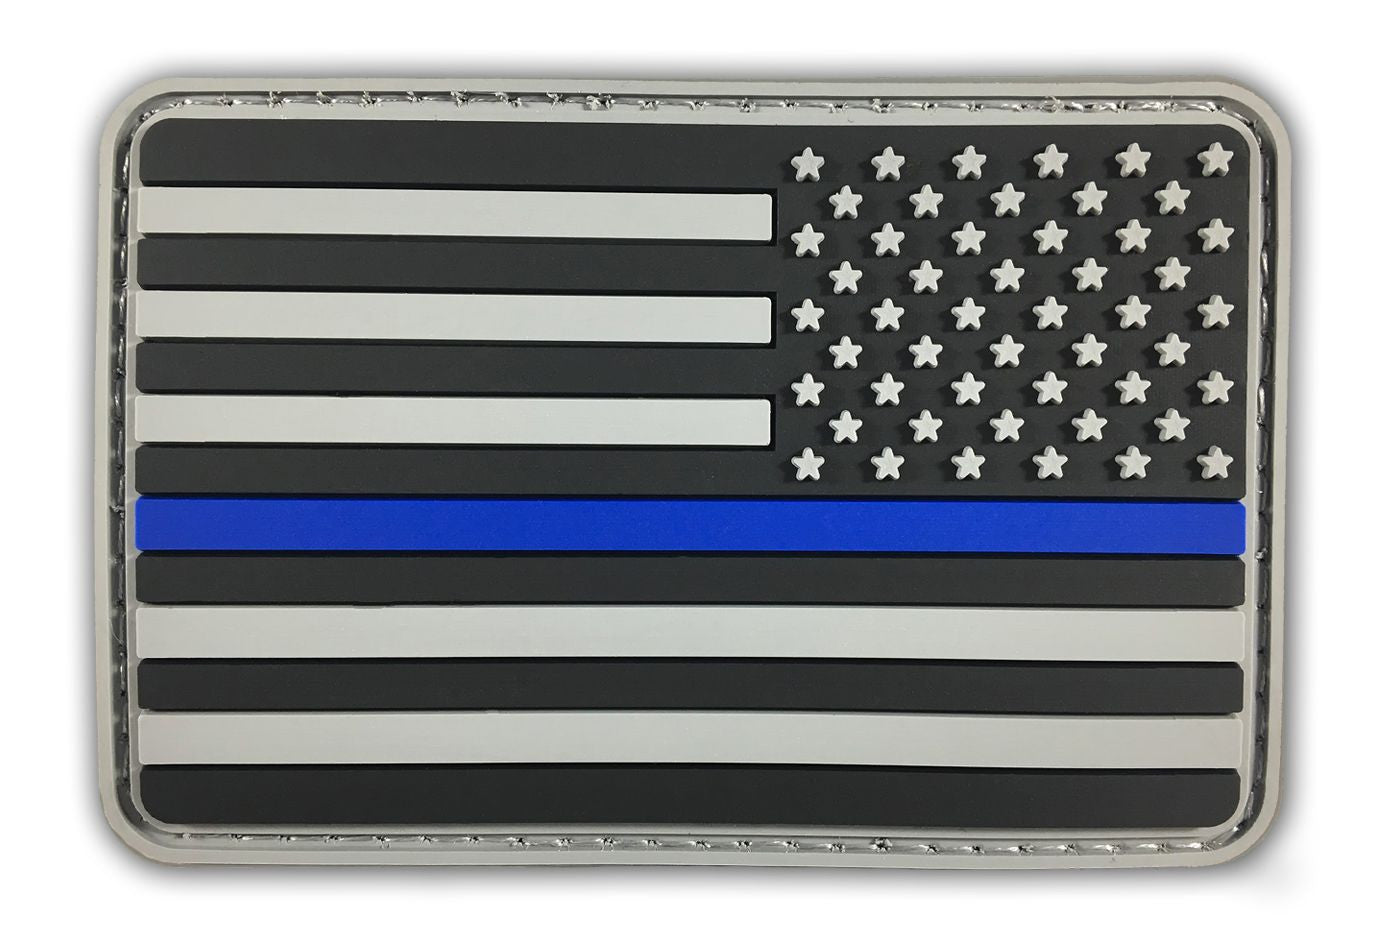 American Flag Patch PVC Rubber w/ Color options - USA Flag Patch, Thin Blue Line Patch, Thin Red Line Patch 2 inch x 3 inch w/ Velcro/Hook Backing